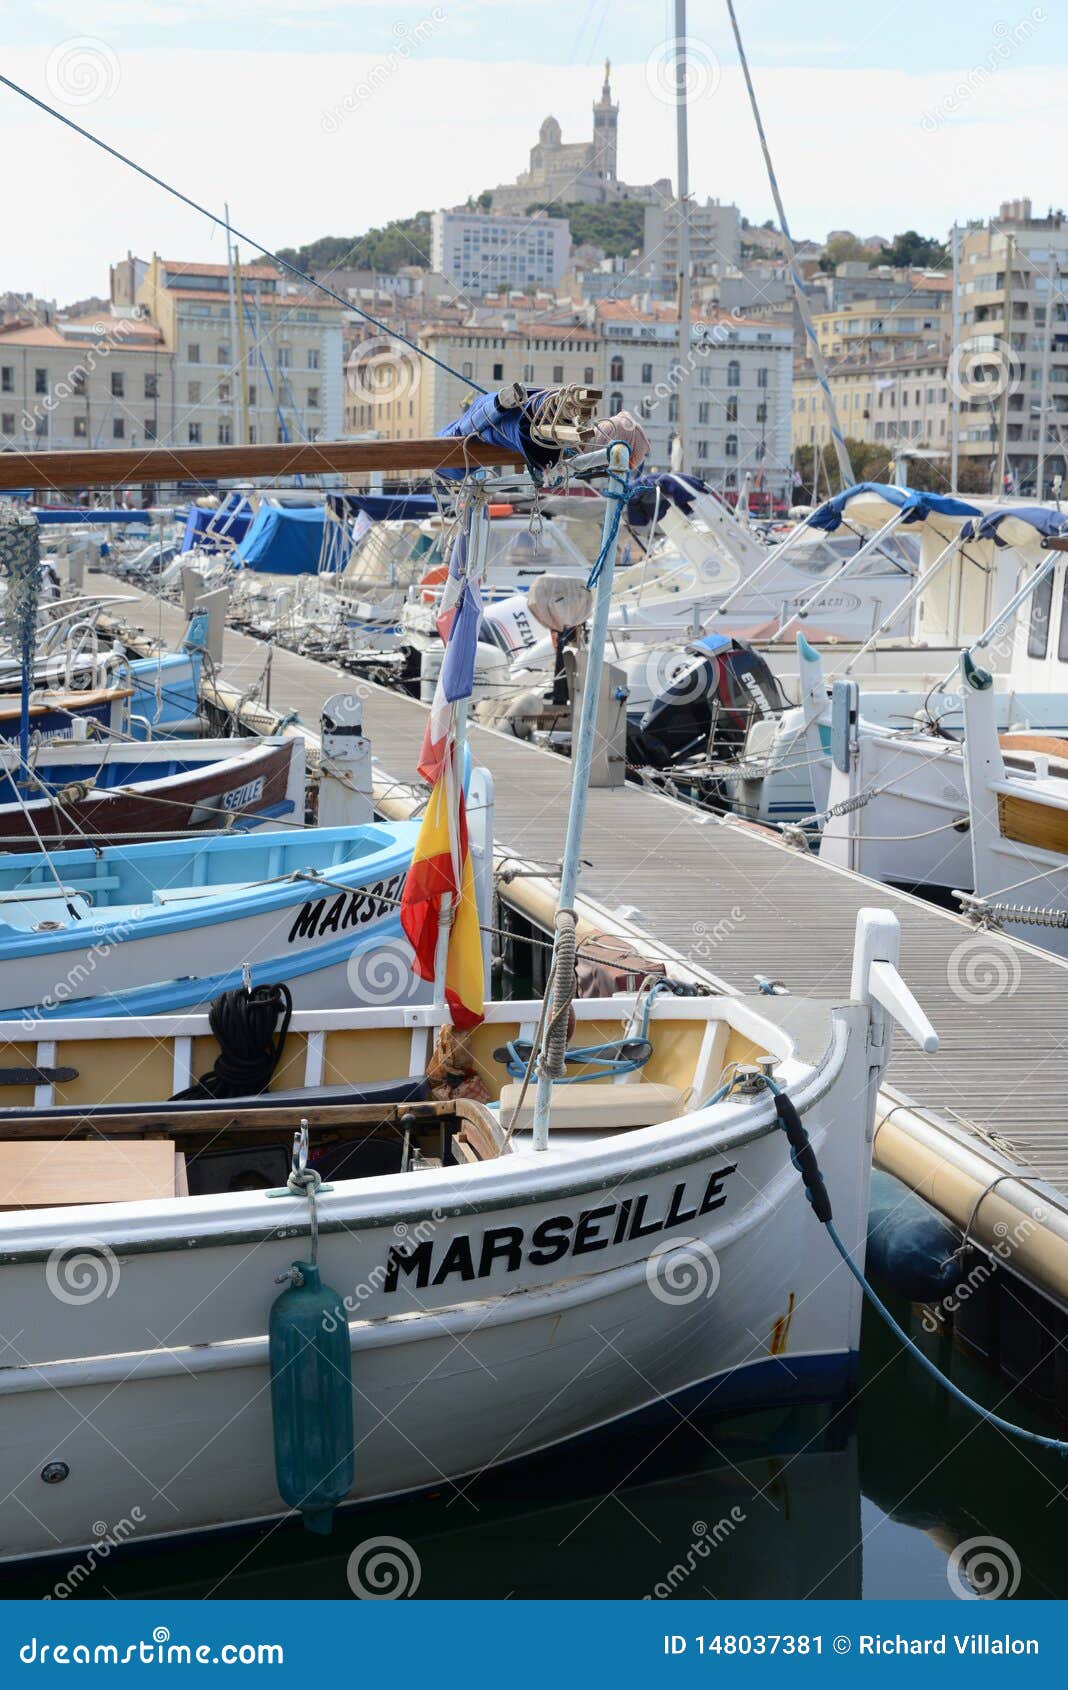 The Old Port of Marseille in the South of France Stock Image - Image of ...